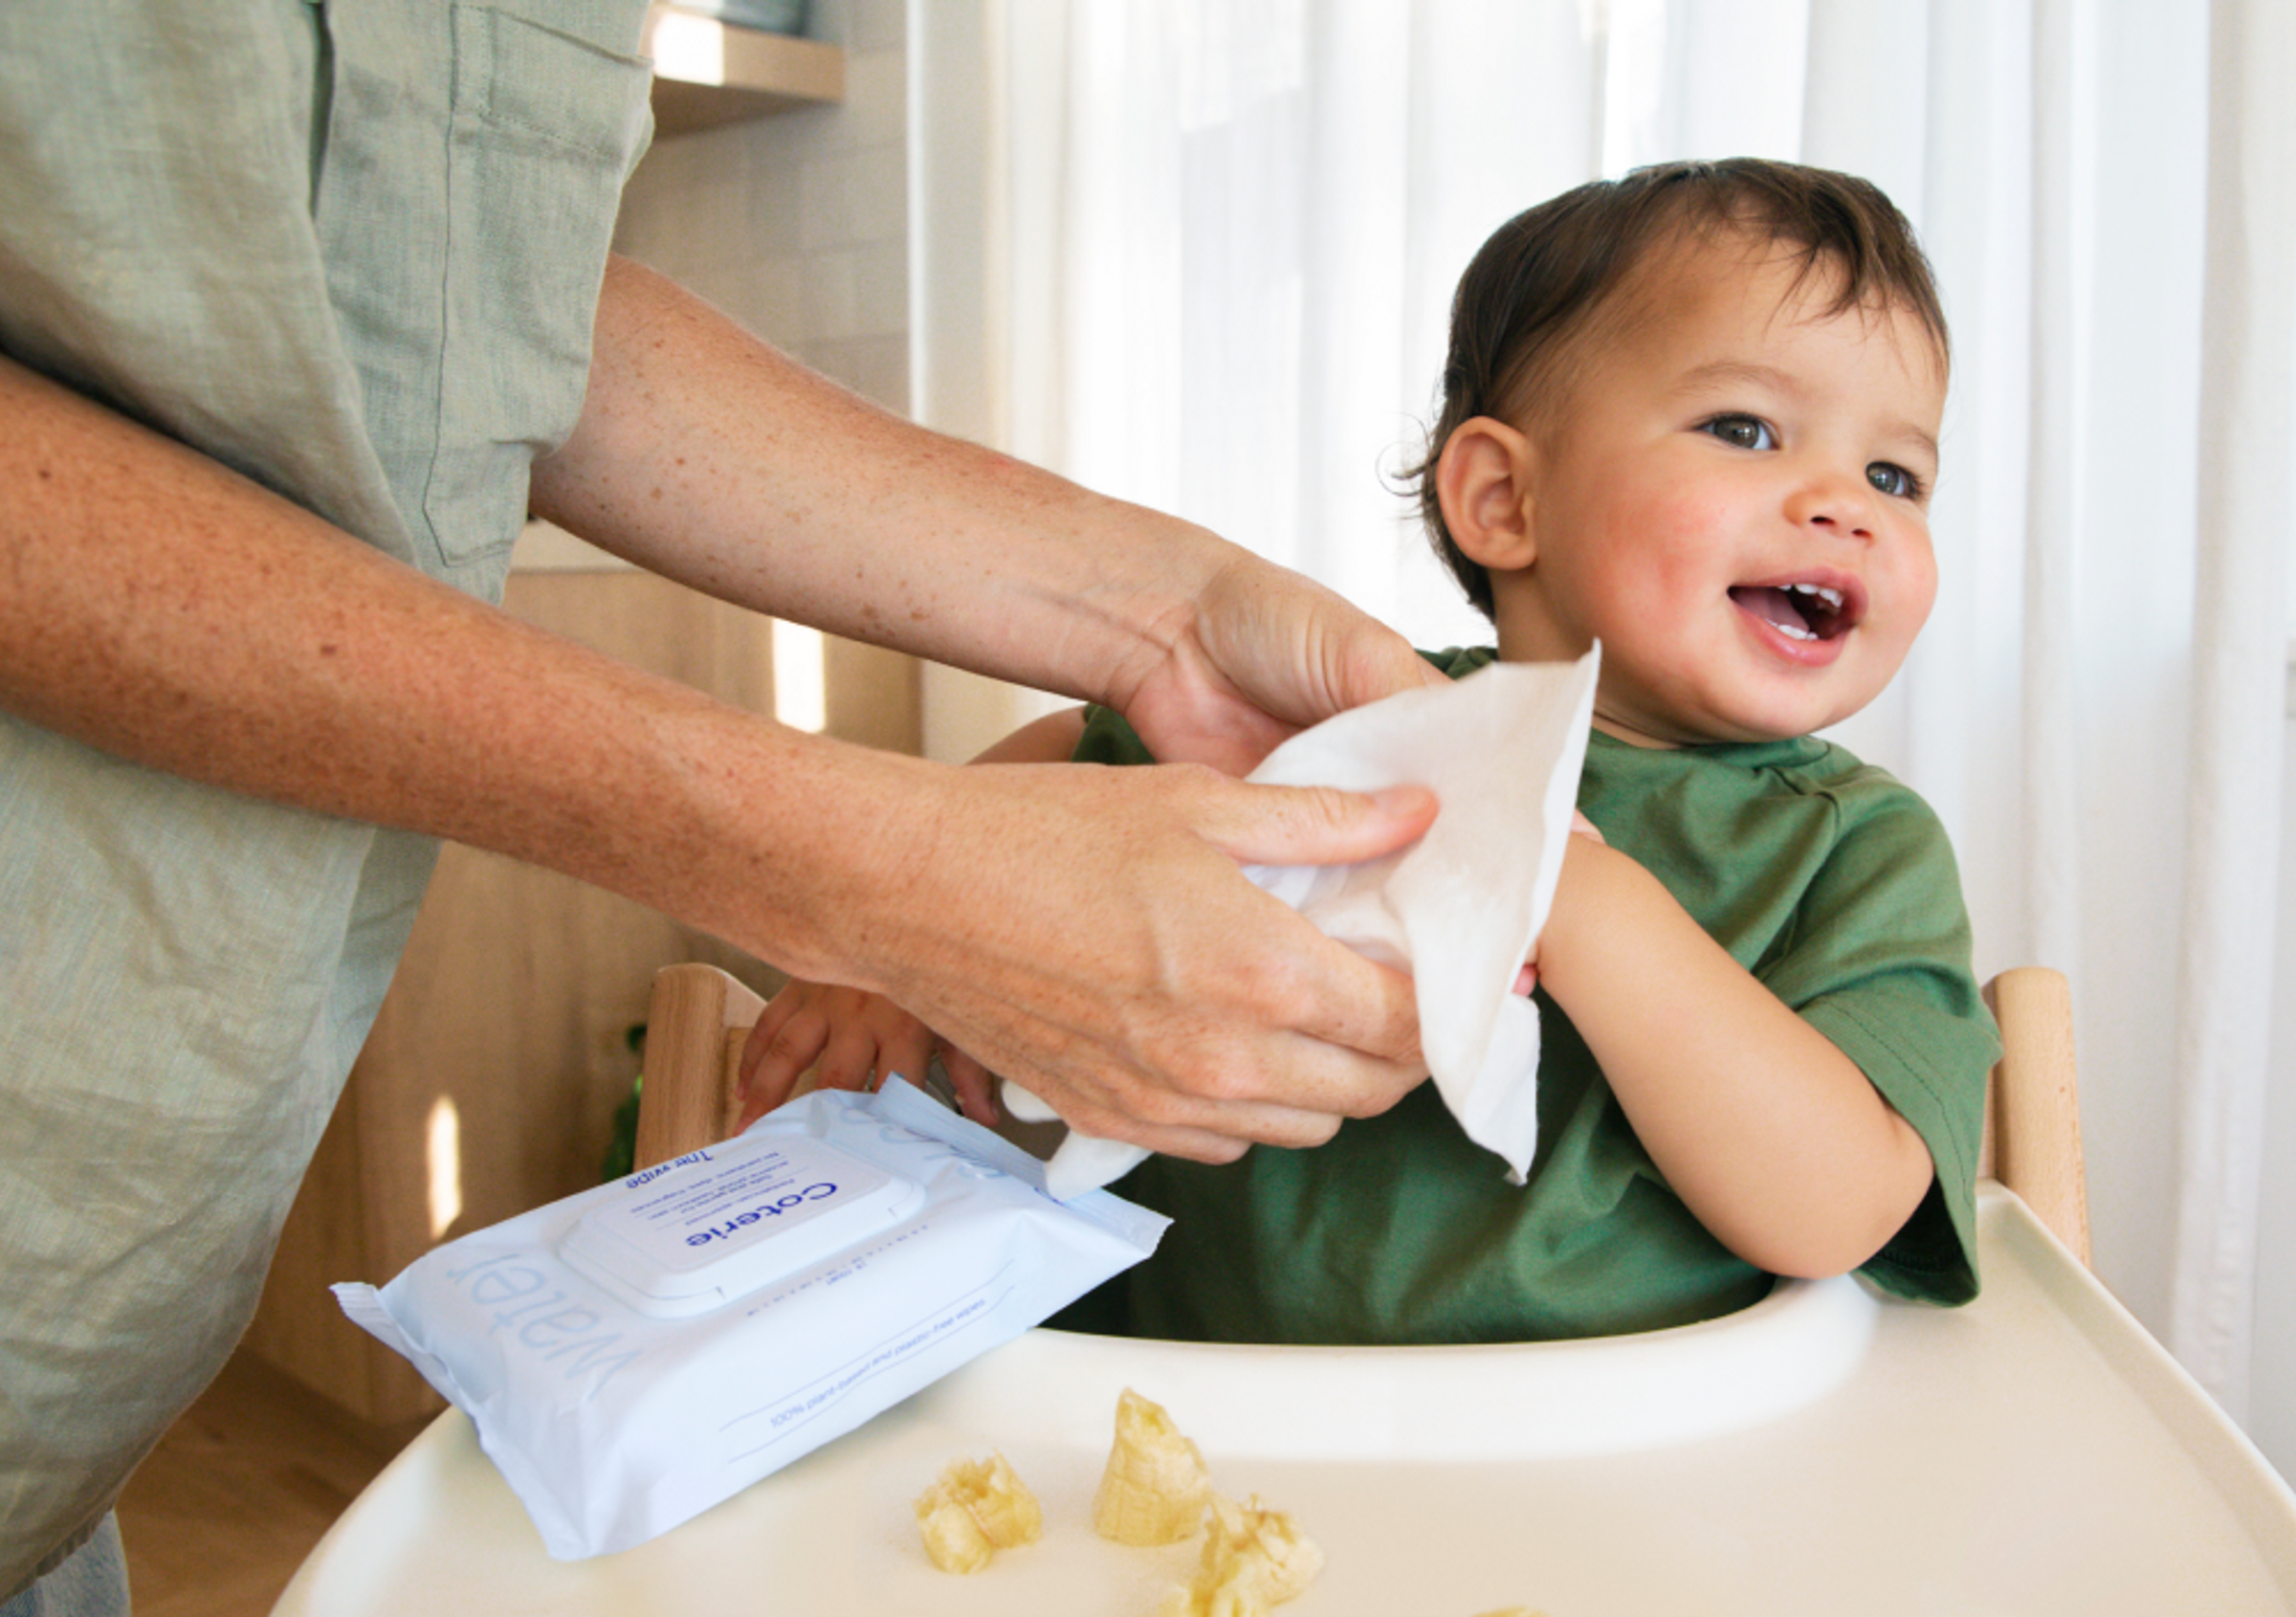 An adult is using a wipe to clean a child after eating